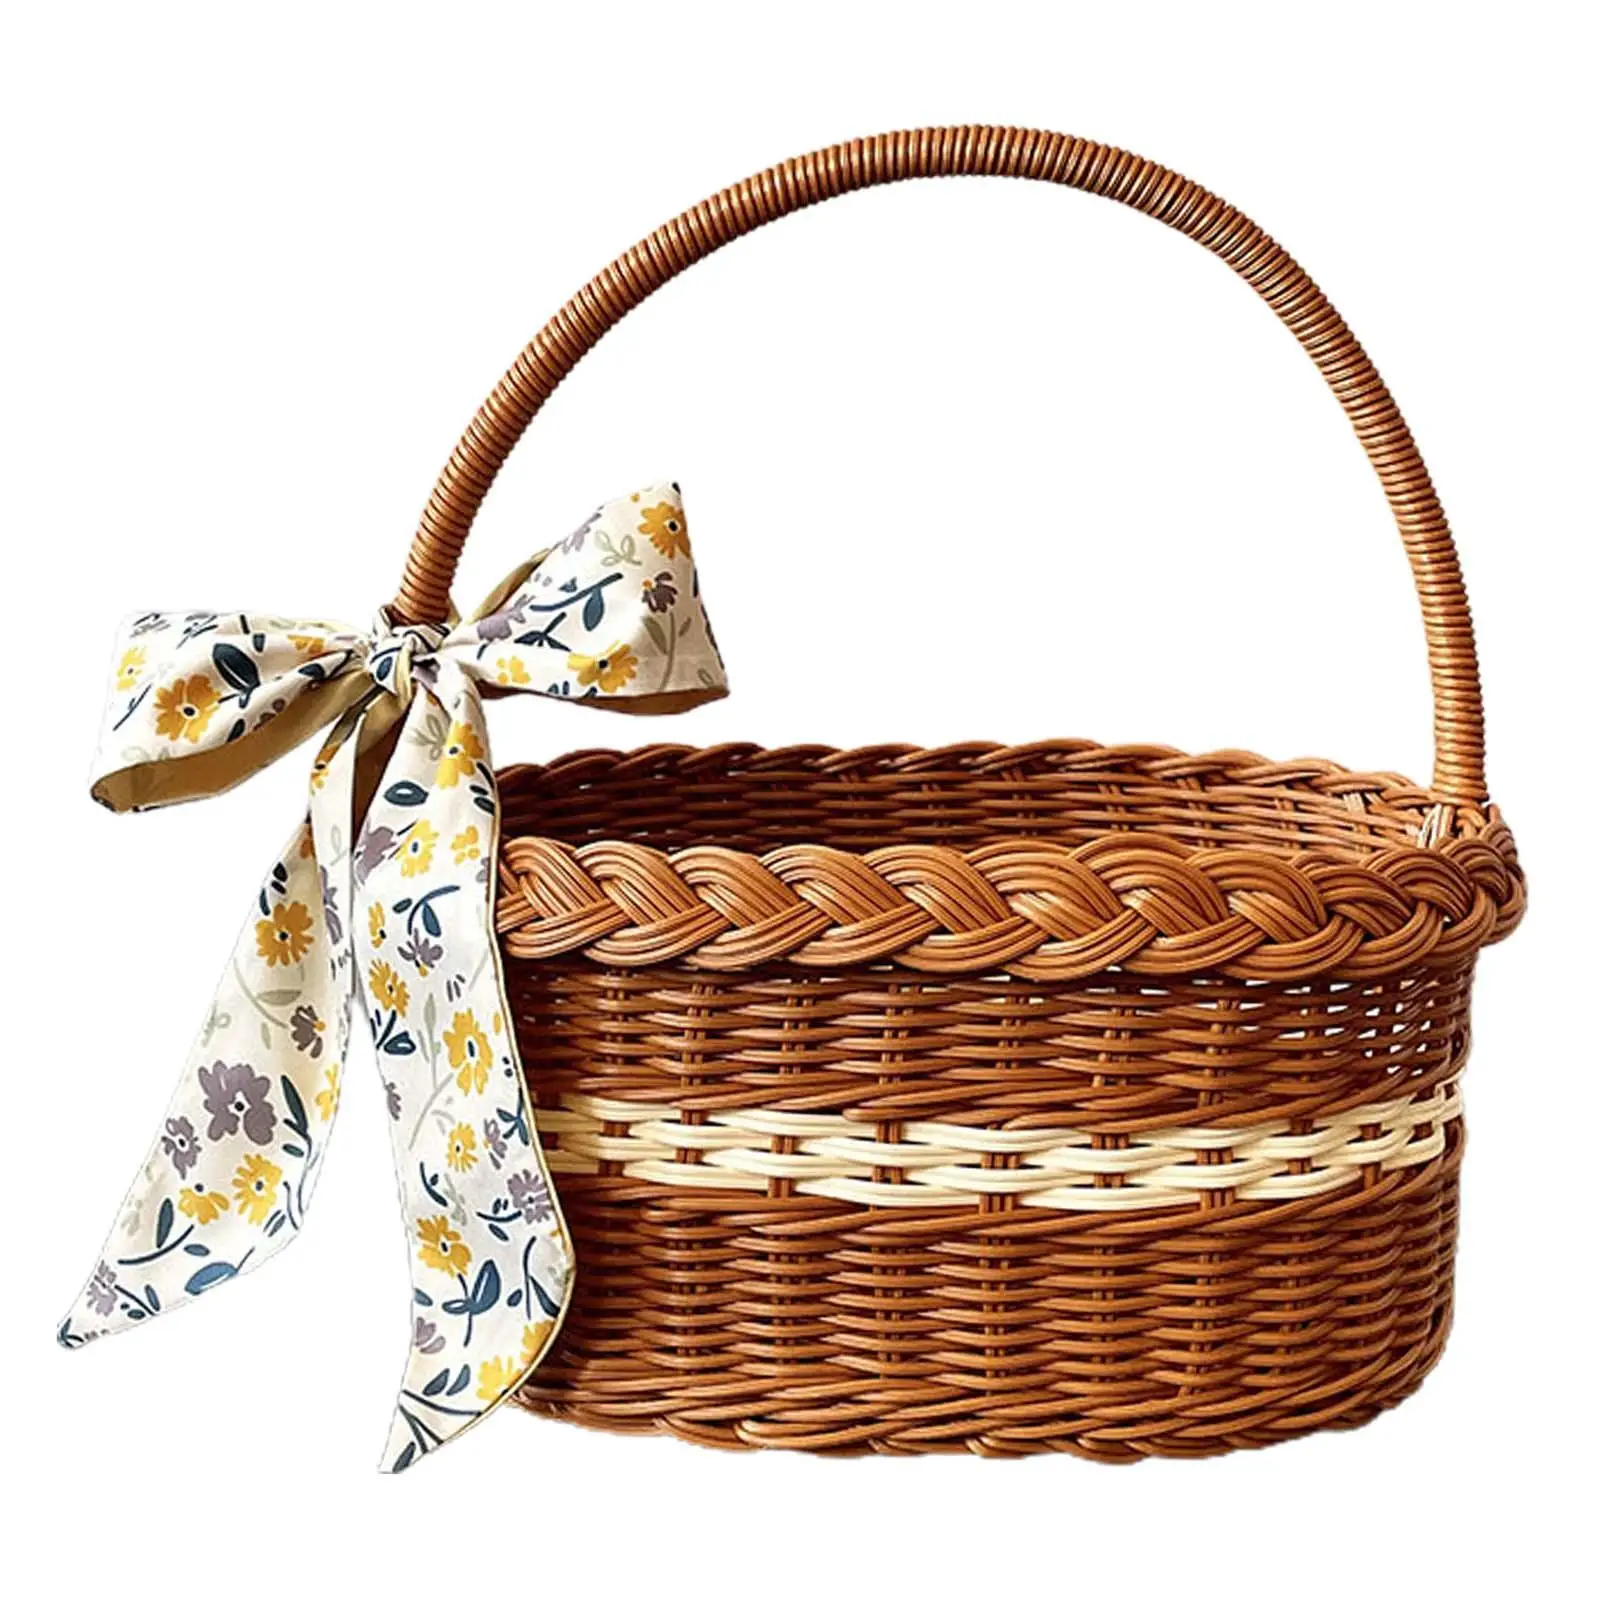 Picnic Baskets with Handles Woven Basket Flower Baskets Woven Storages Basket for Family